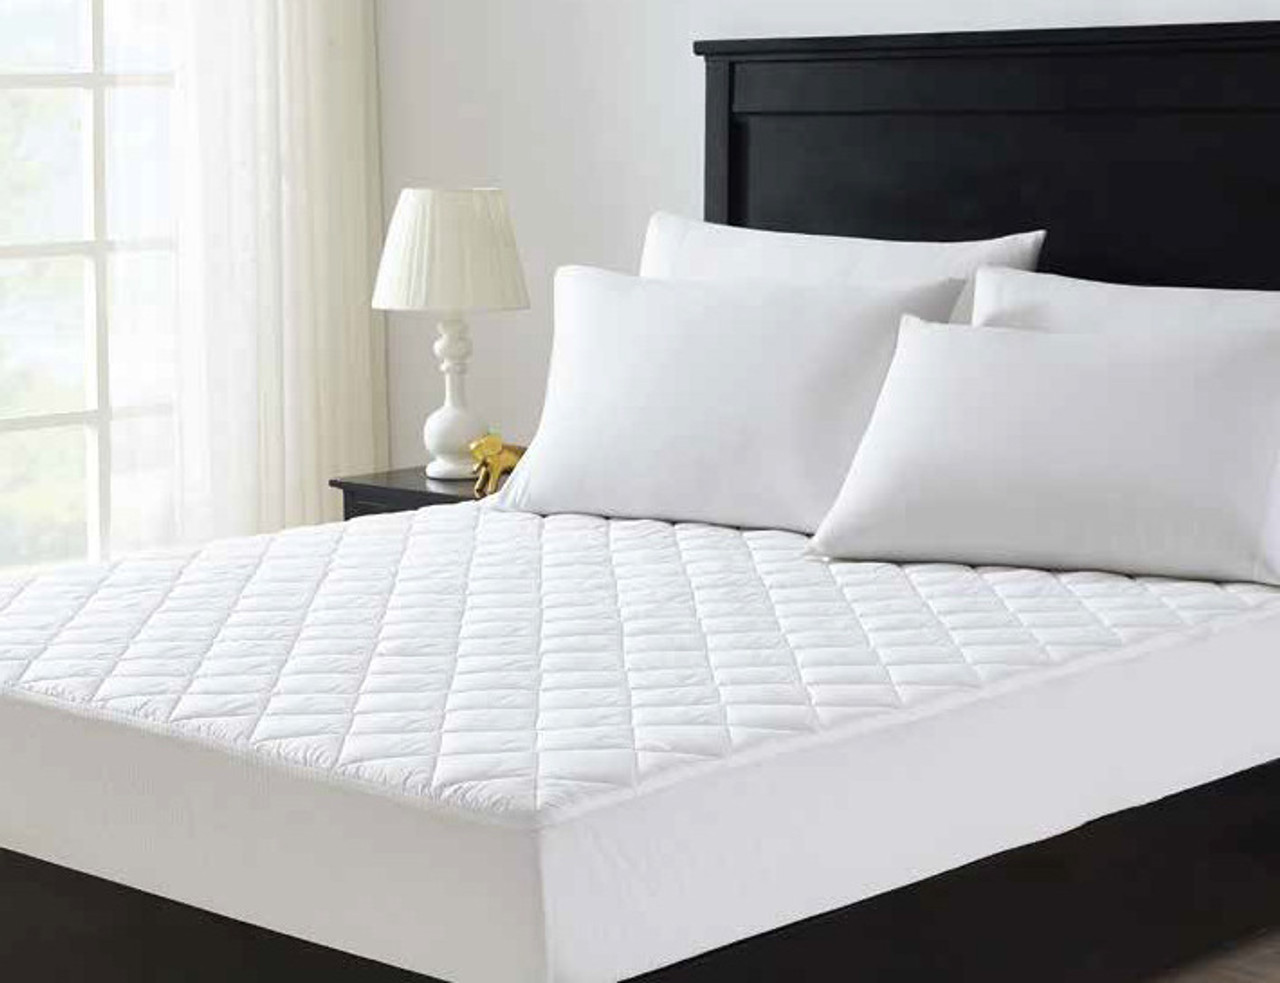 Mattress with Downlite Hospitality waterproof mattress pad with dark wooden accents.